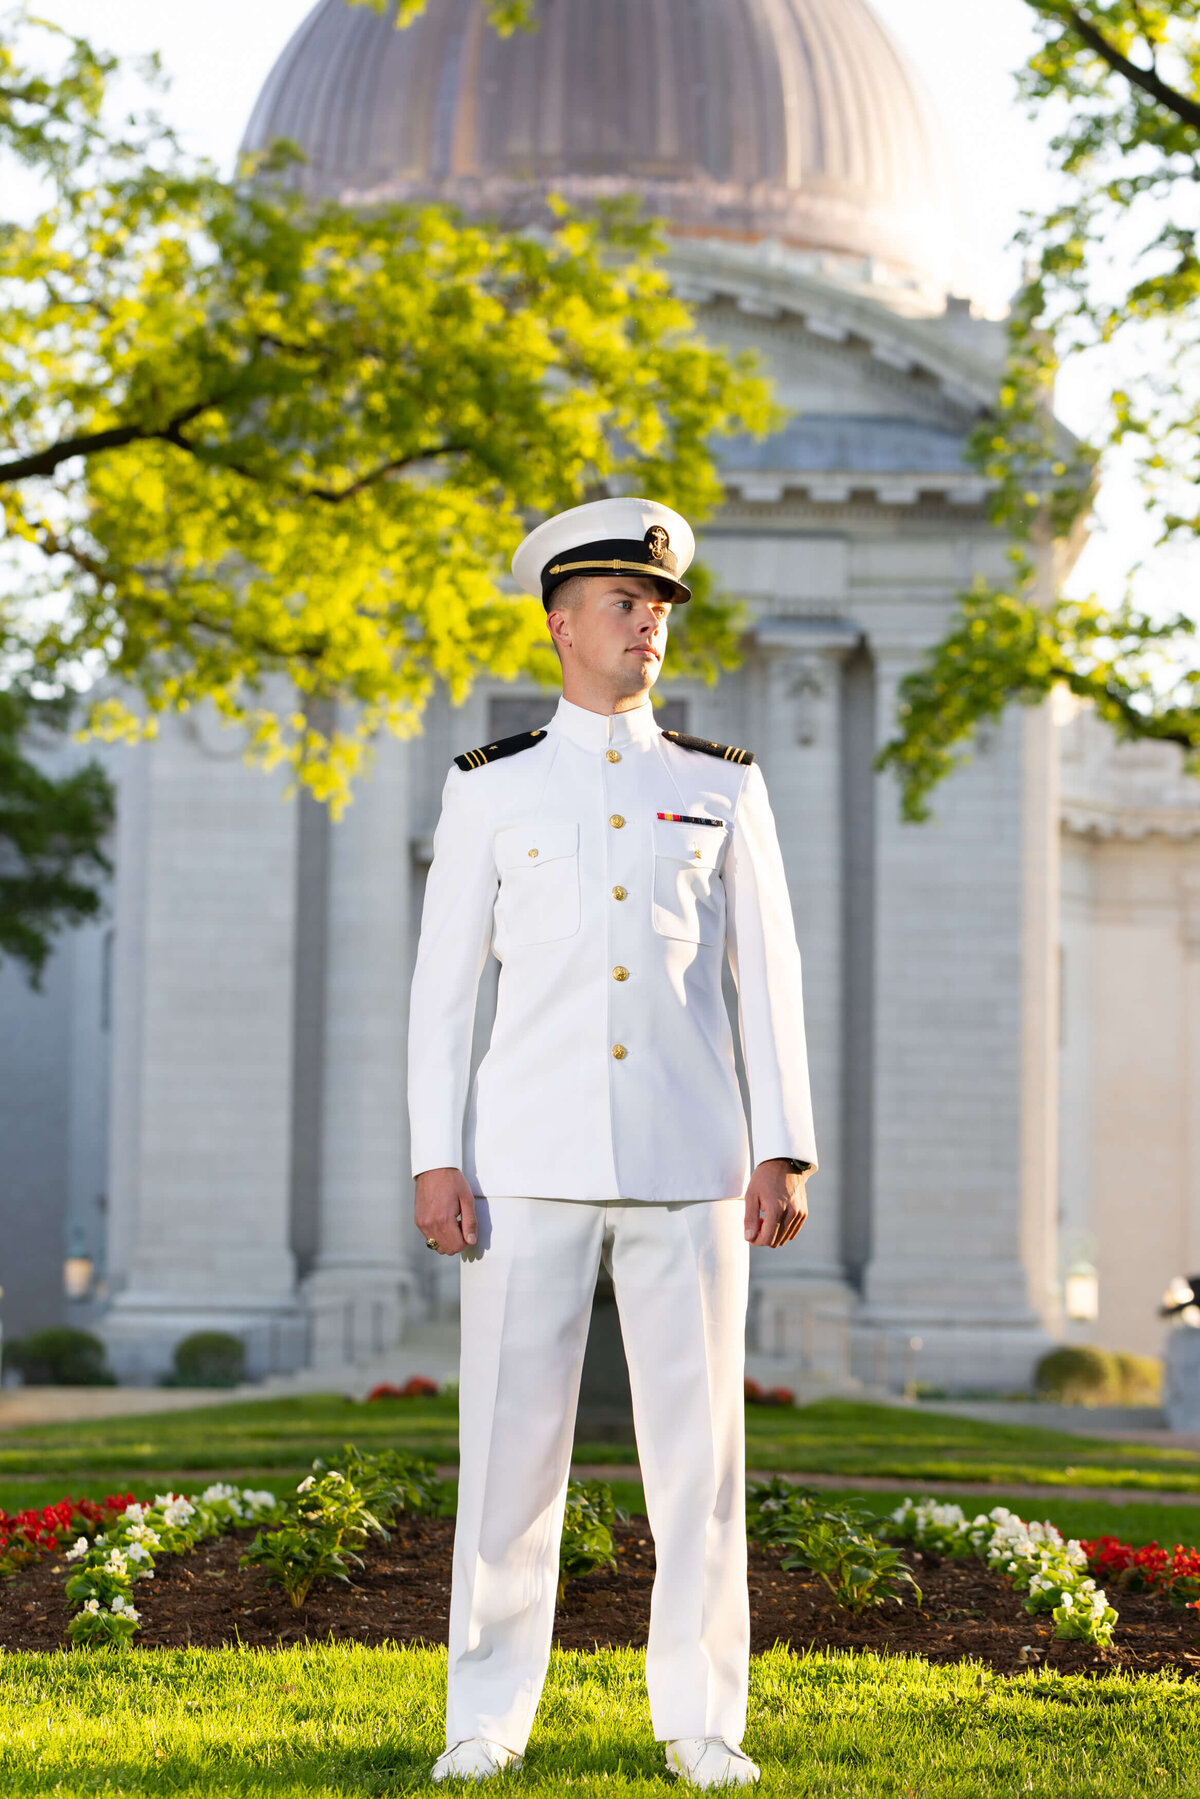 Senior Portrait in Annapolis Maryland of Midshipman in whites at Naval Academy Chapel dome with flowers.